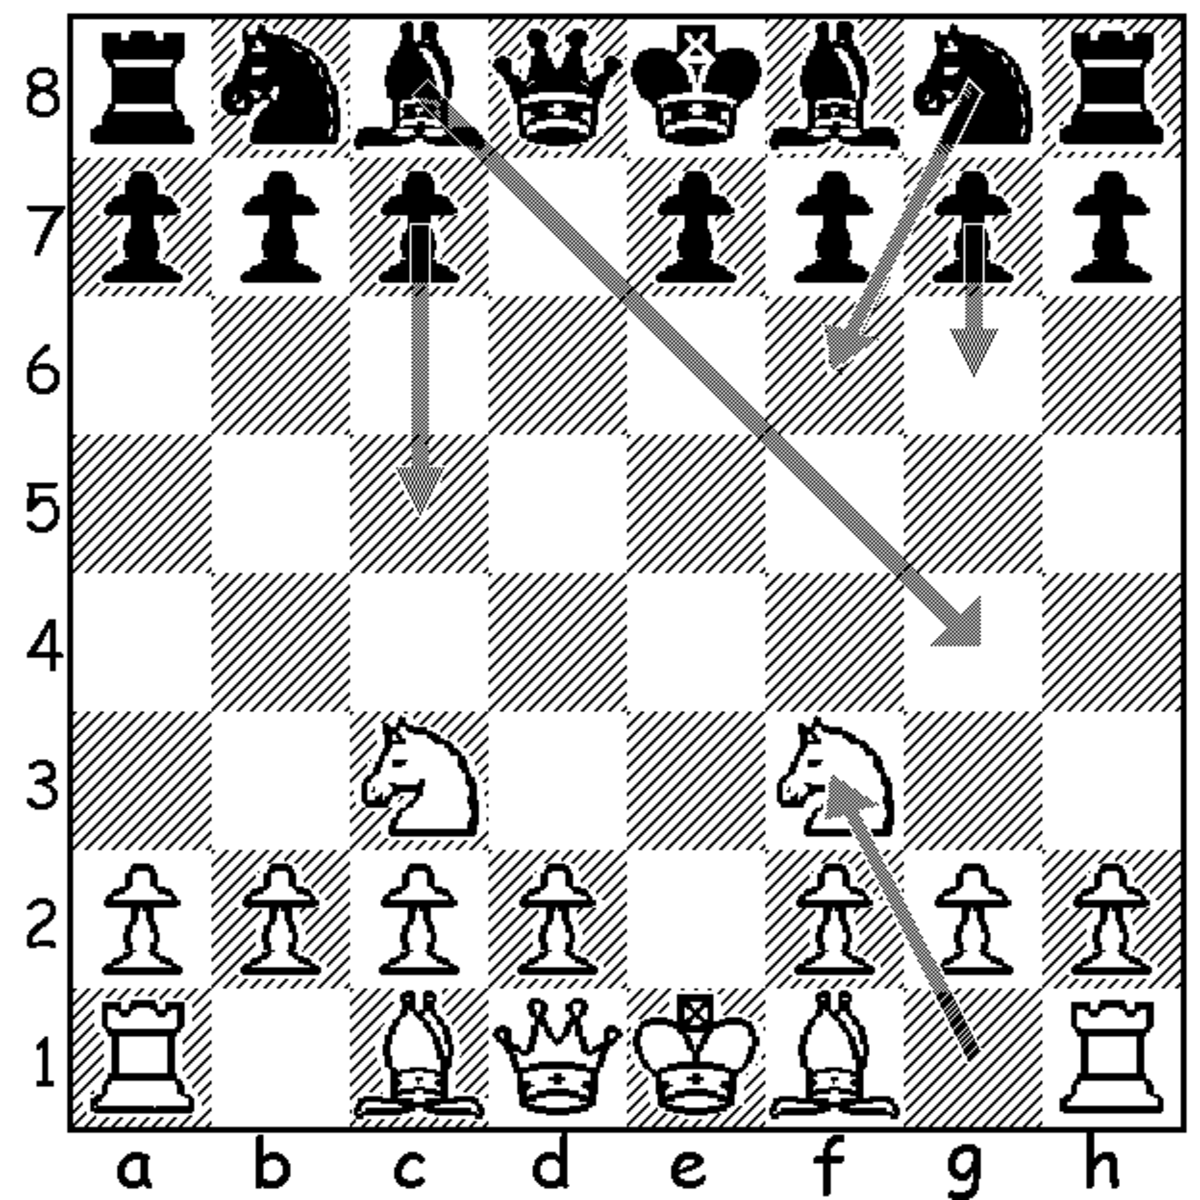 chess-openings-a-simple-and-complete-repertoire-for-white-against-the-scandinavian-center-counter-defense